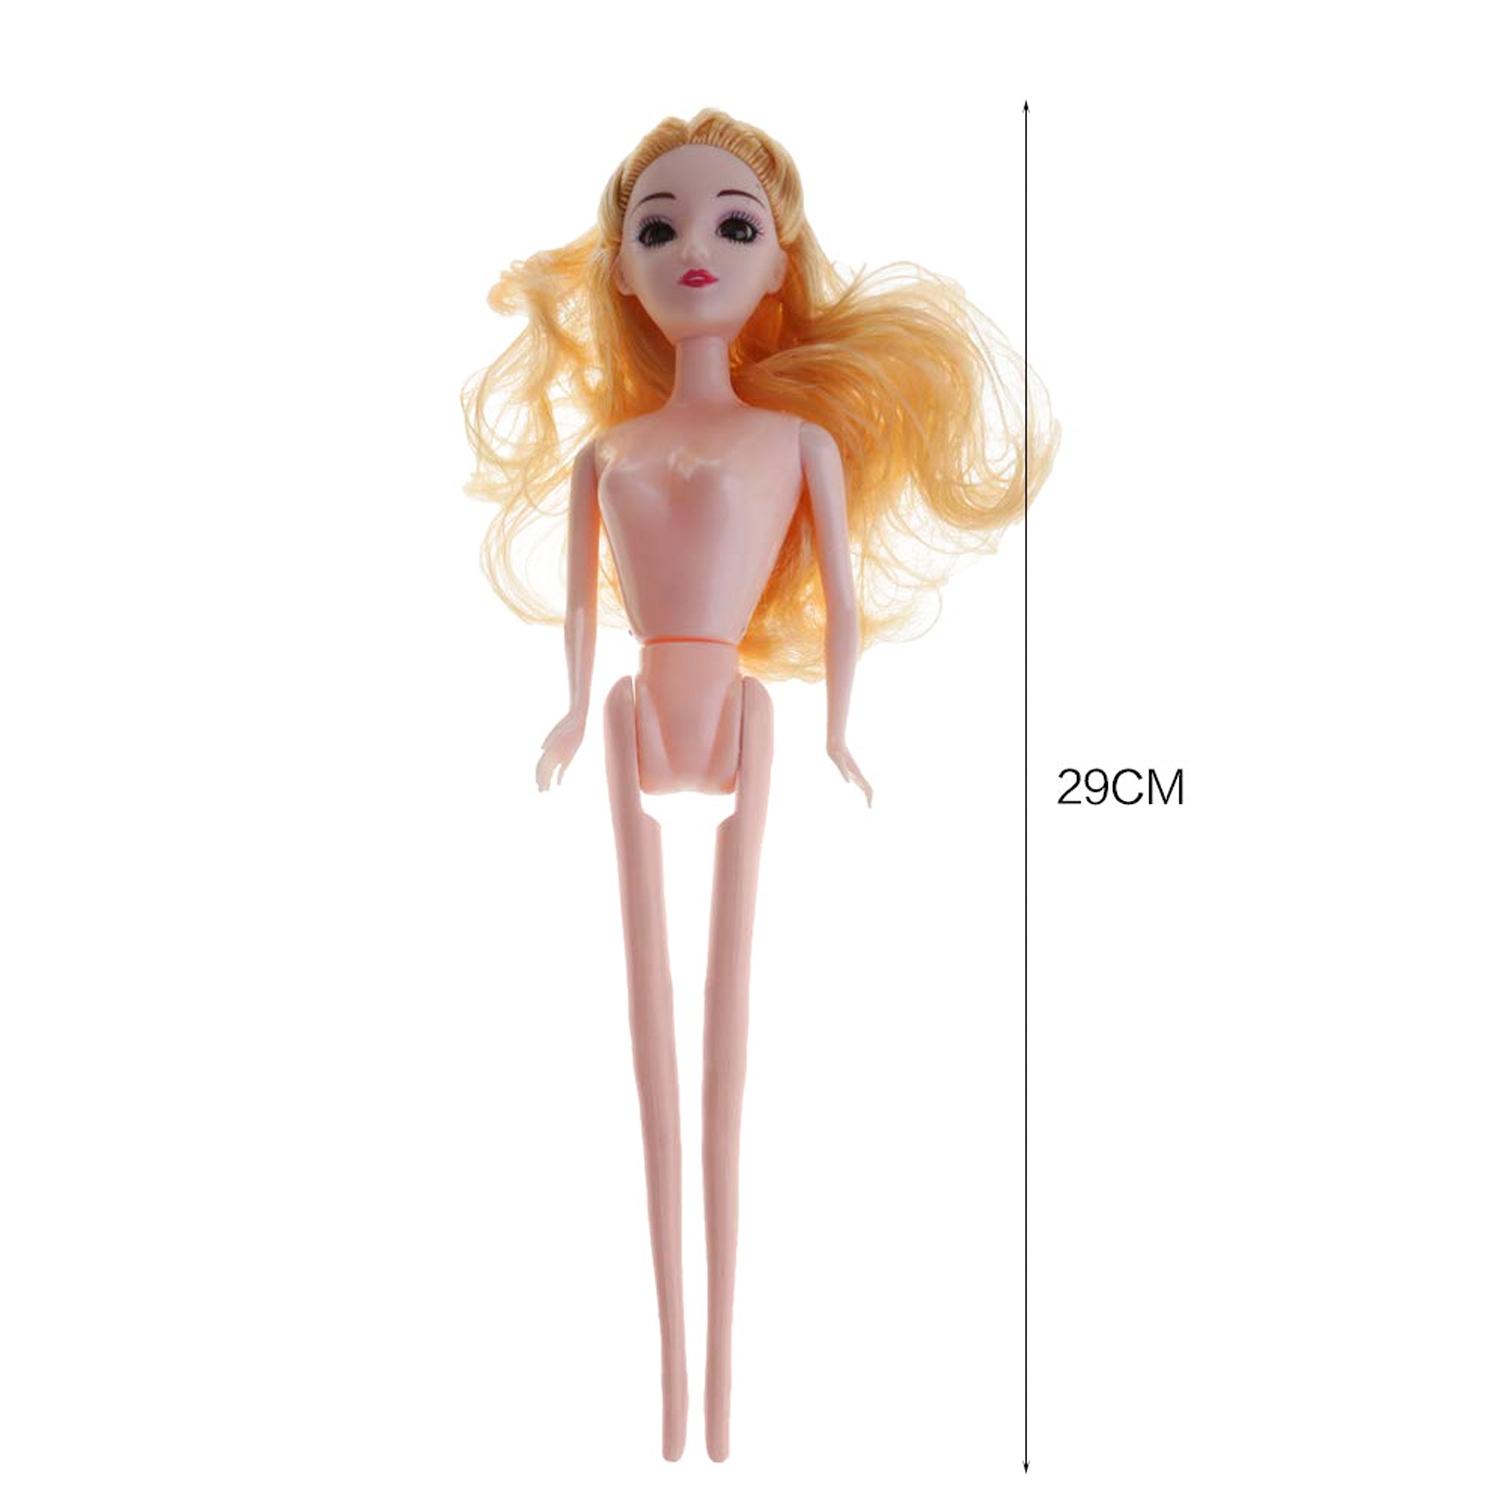 BARBIE DOLL WHOLE WITH BLONDE HAIR